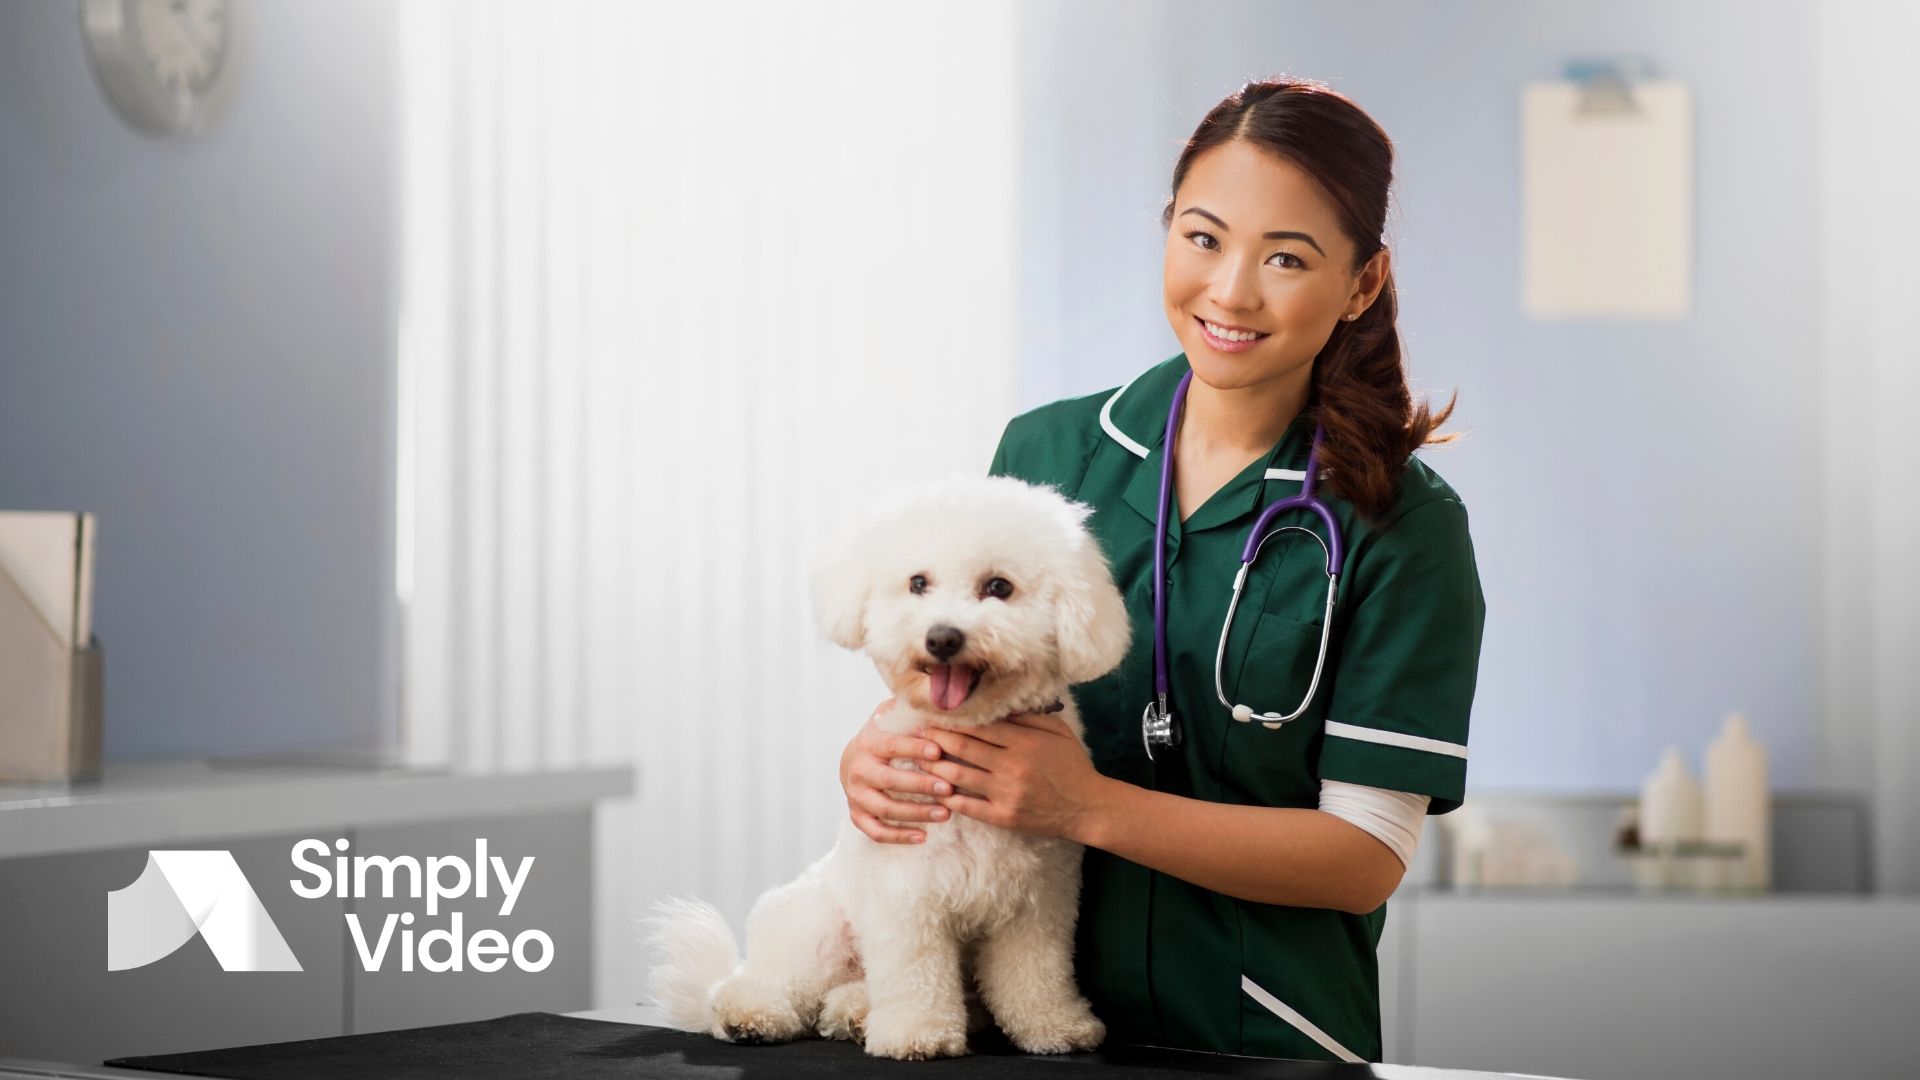 Extended reality is making big waves in the world of veterinary care – especially in the context of education. Learn how it's helping trainee vets save lives.